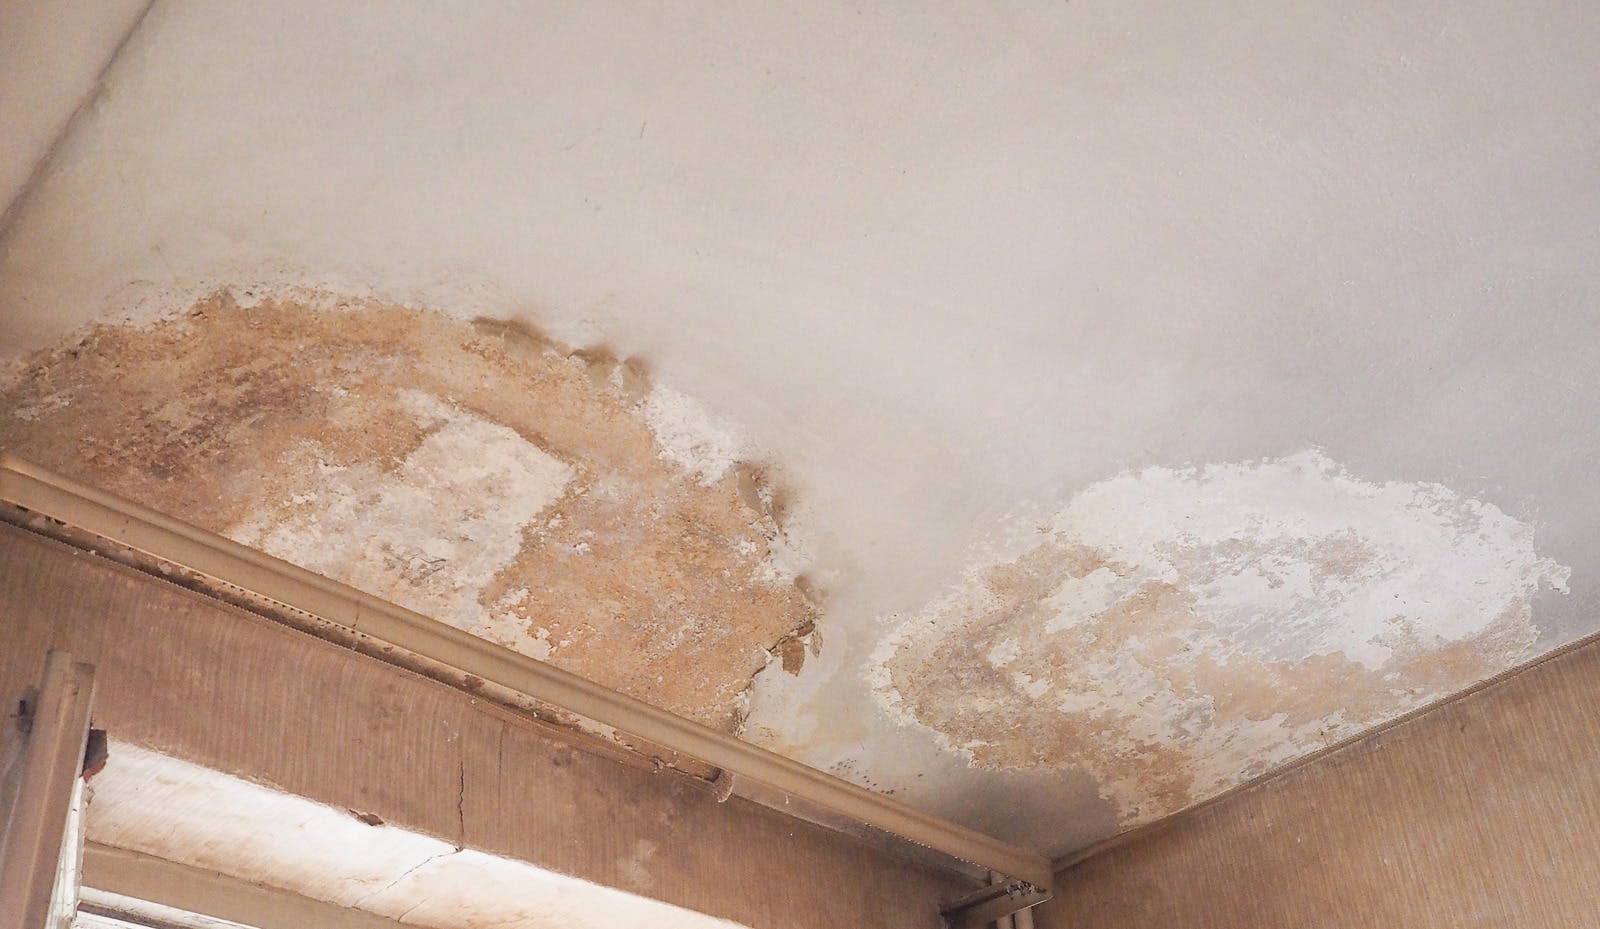 Rising damp services Derbyshire, South Yorkshire and Nottinghamshire